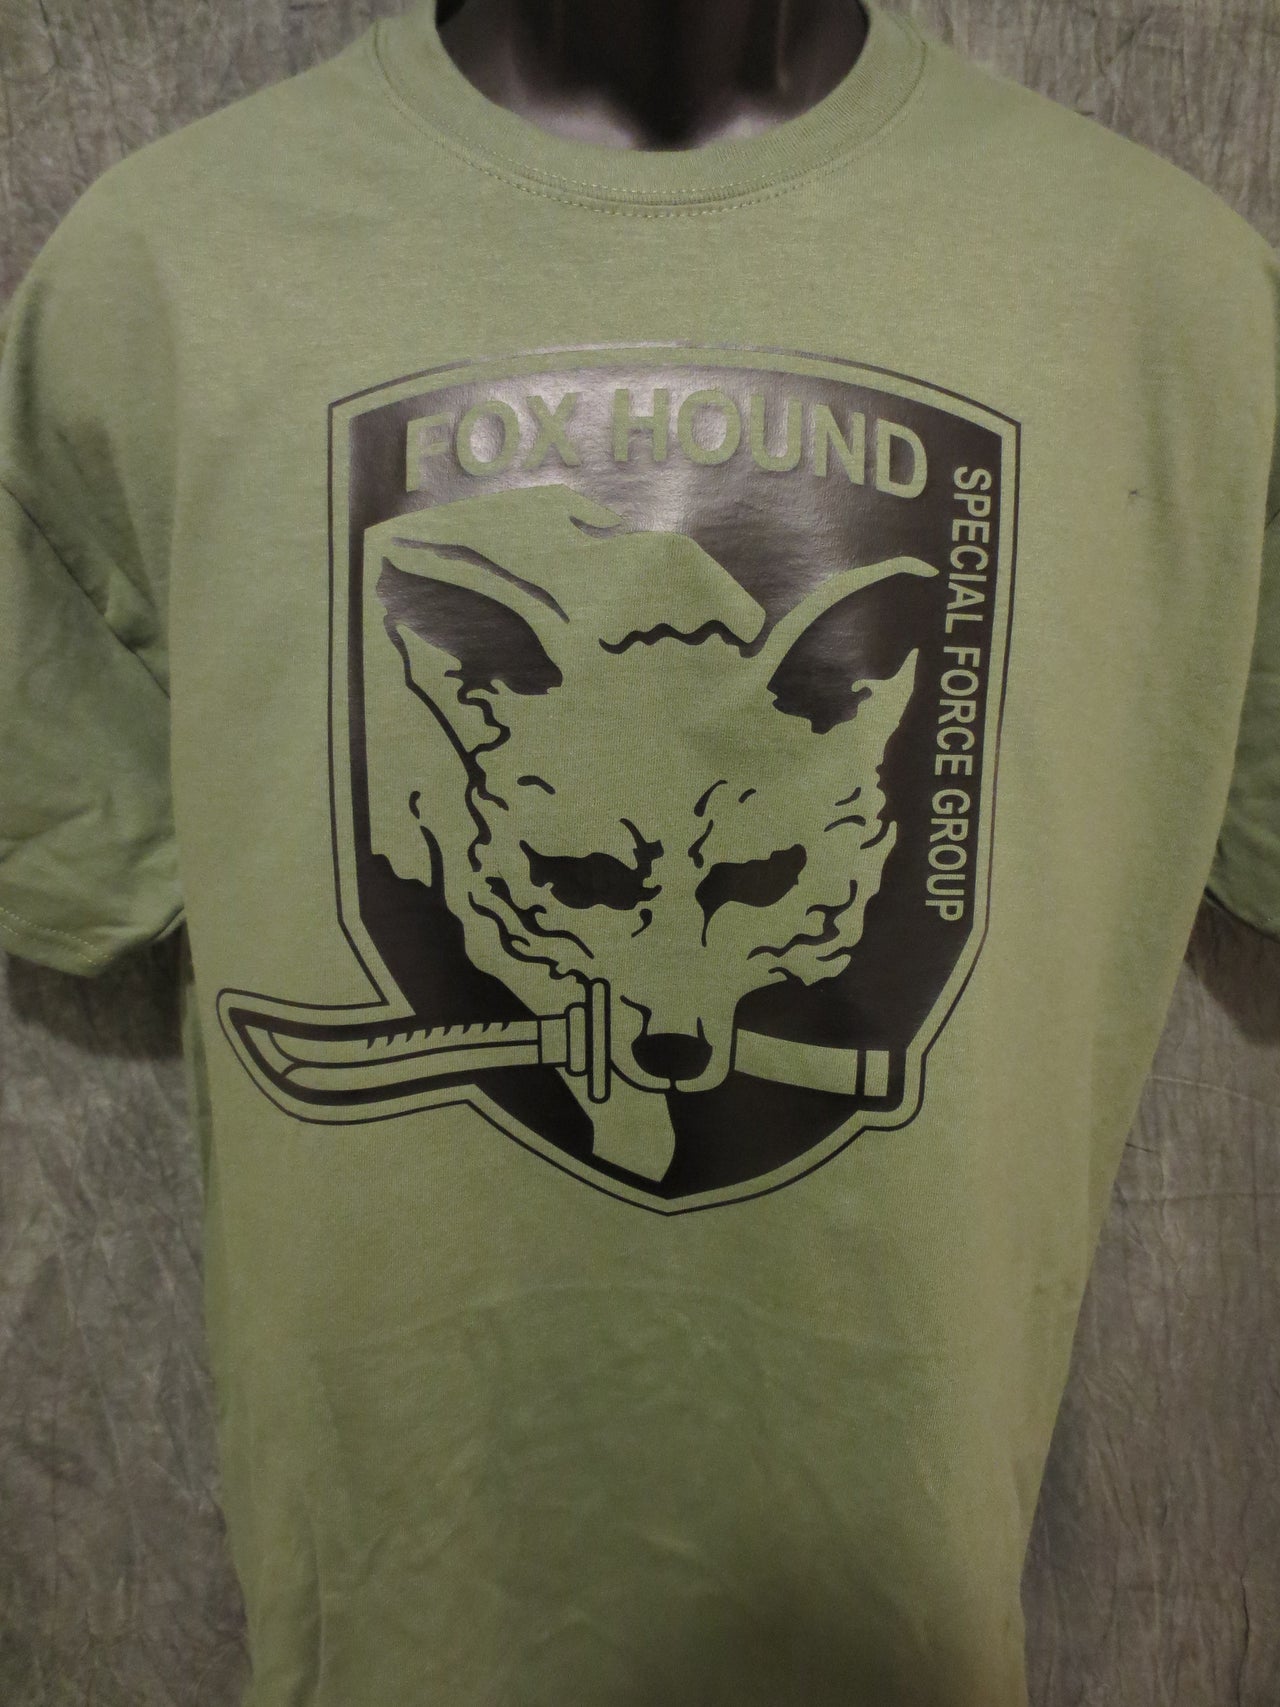 Metal Gear Solid Fox Hound Special Force Group Tshirt: Military Army O.D. Green With Black  Print - TshirtNow.net - 2